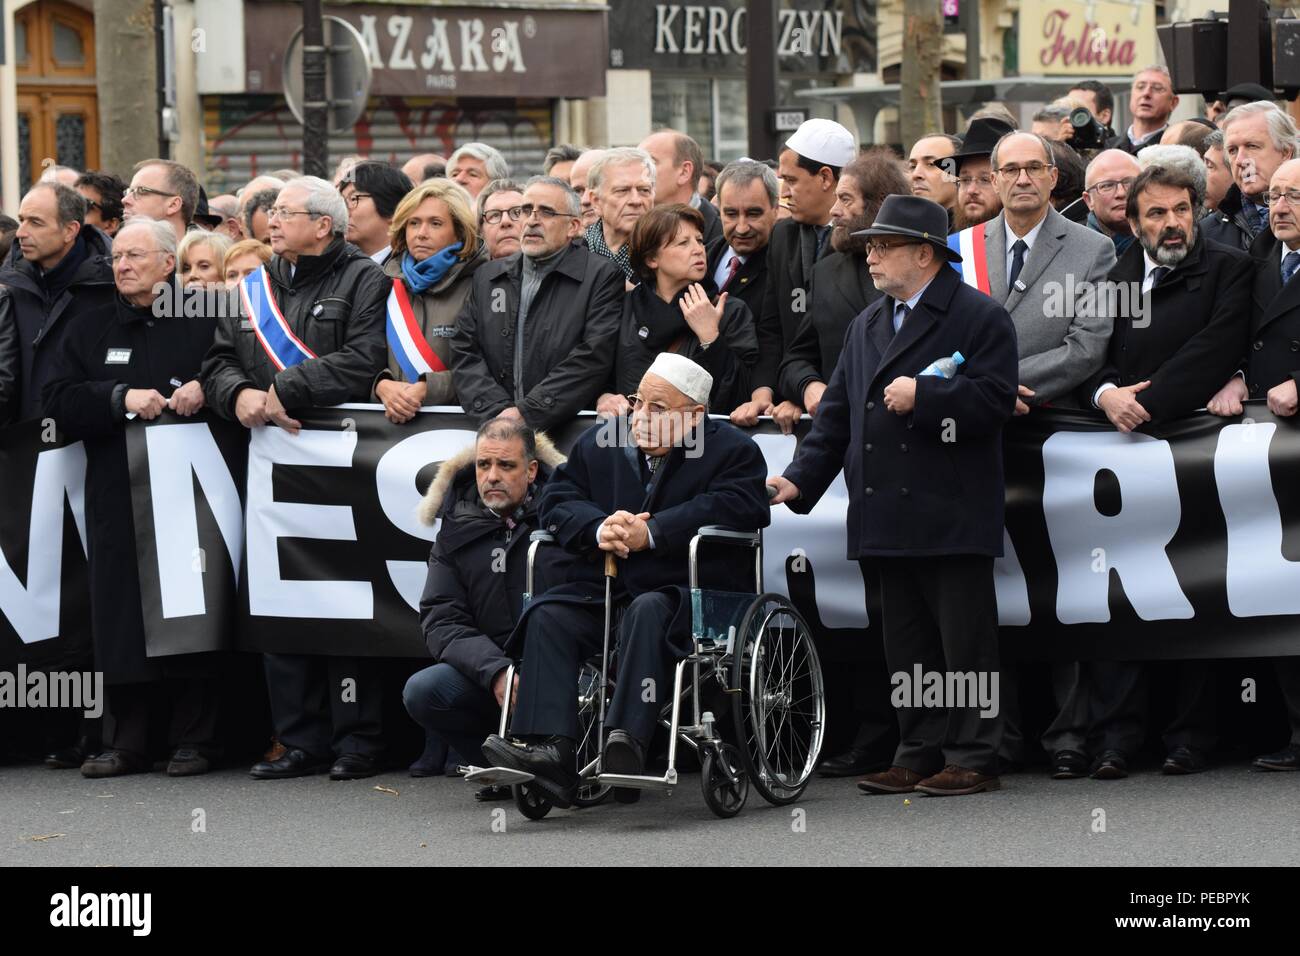 January 11, 2015 - Paris, France:  French politicians from across the political spectrum take part in a unity march following the deadly Paris attacks. Four million people demonstrated across the country in a 'Marche Republicaine' (Republican March) celebrating the nation's unity in face of terrorist threats. Thousands of people had banners or cartoons referring to Charlie Hebdo, the satirical magazine whose office was targeted by Islamist gunmen earlier in the week. La grande marche republicaine en hommage aux victimes de l'attentat contre Charlie Hebdo a rassemble pres de 2 millions de perso Stock Photo